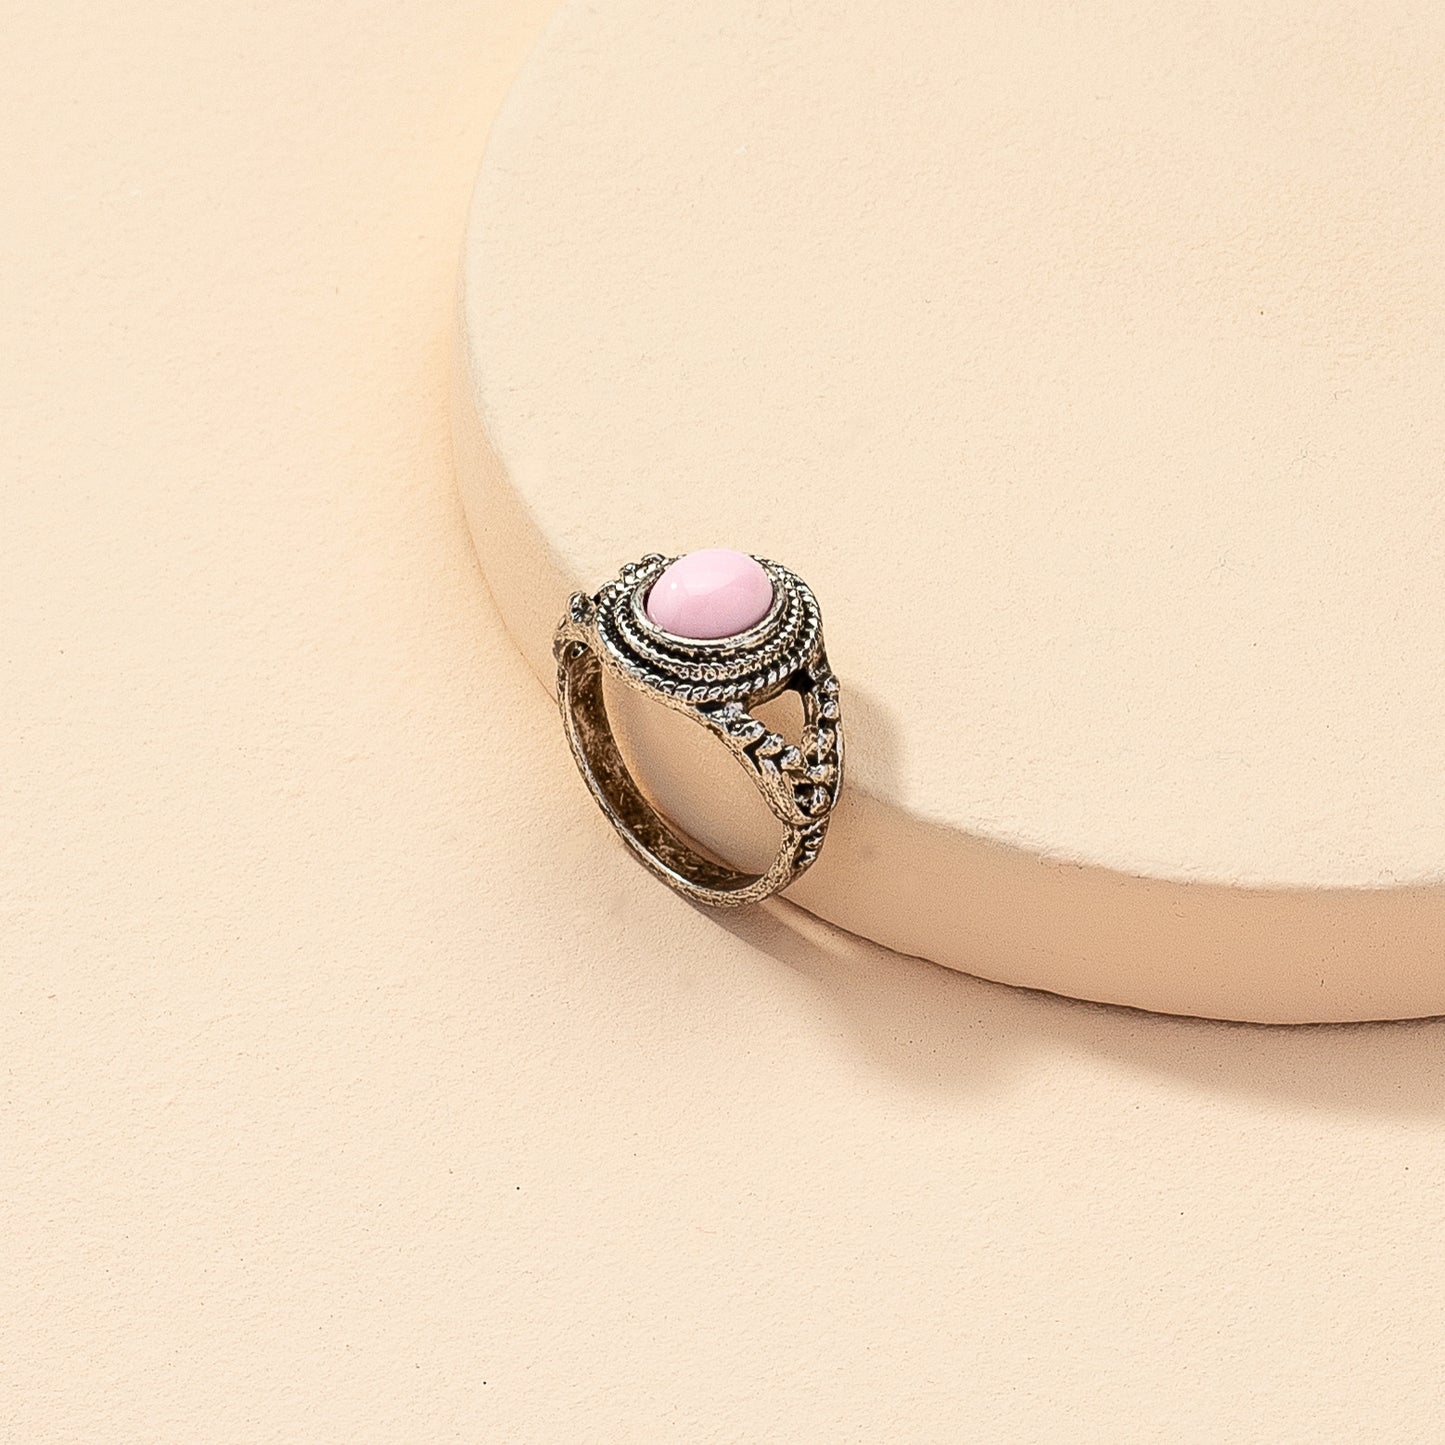 European Pink Stone Ring - Trendy Handcrafted Jewelry for Fashion Enthusiasts